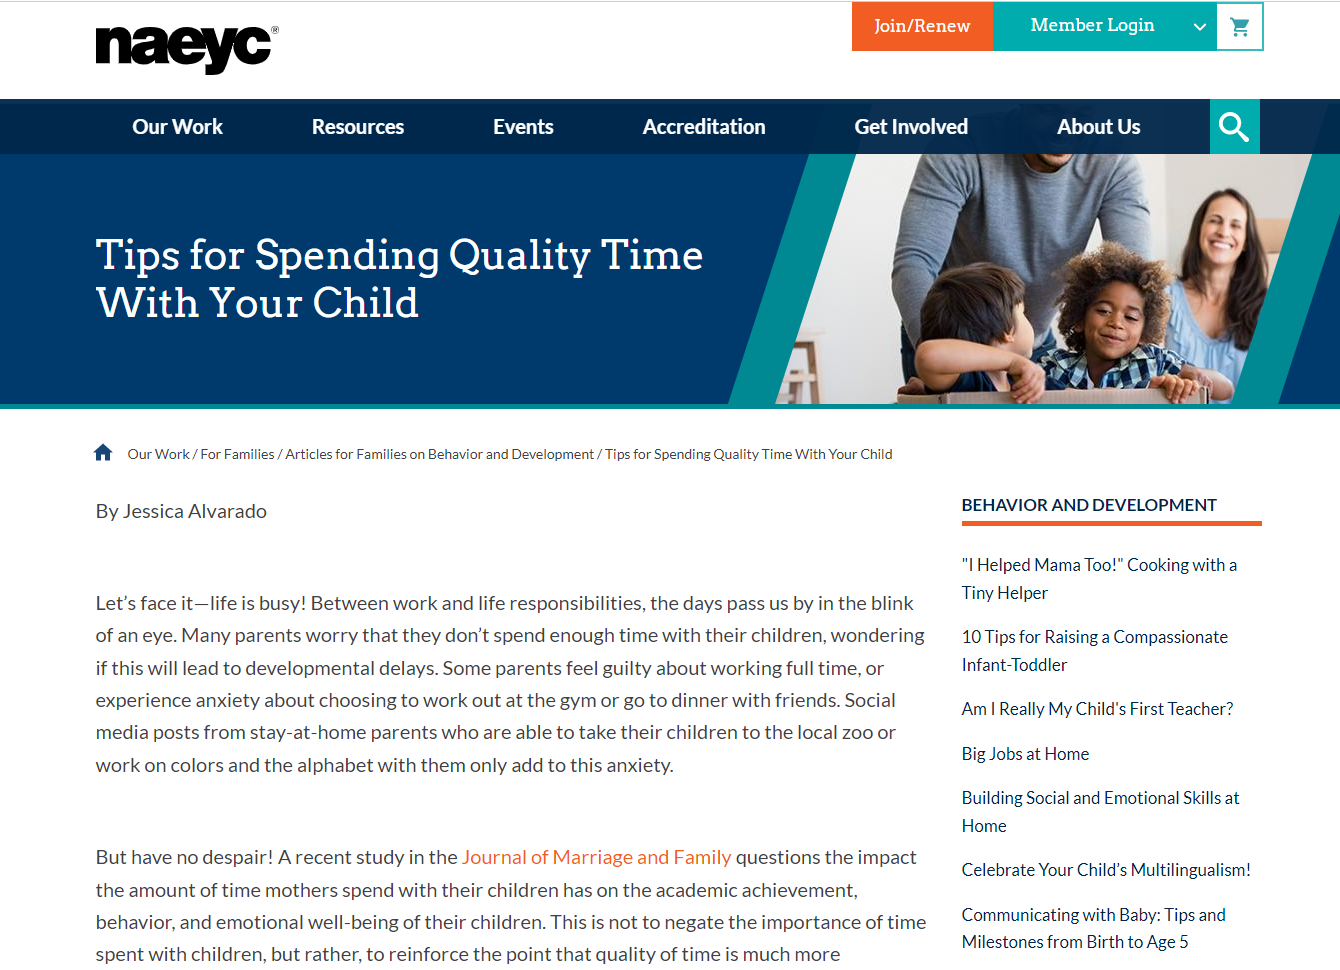 Tips for Spending Quality Time with Your Child, NAEYC